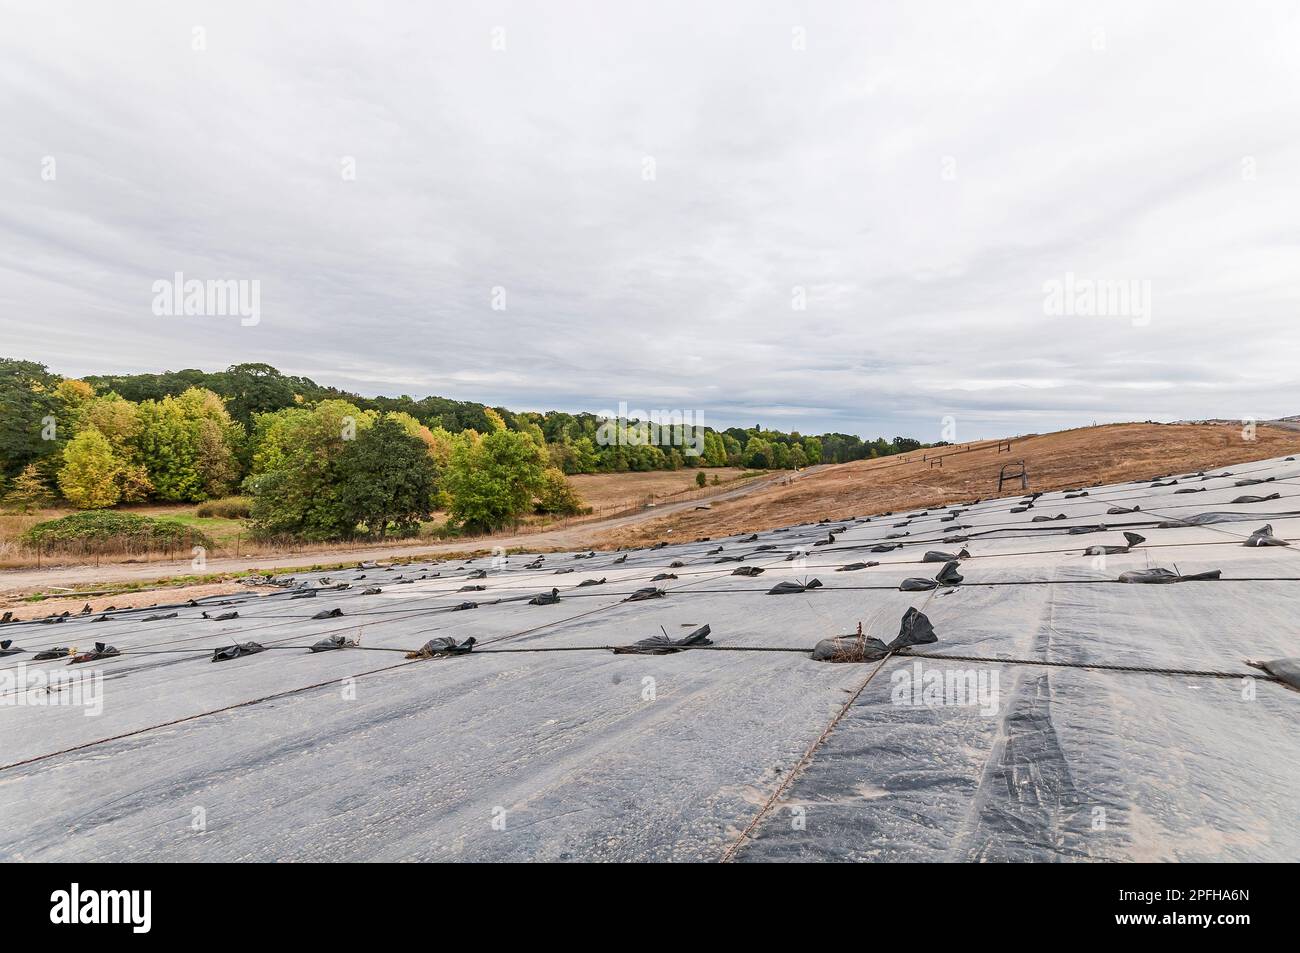 Weighted plastic sheeting covers a hillside in an active landfill.  Probably PVC geomembranes with a tree-line in the distance. Stock Photo